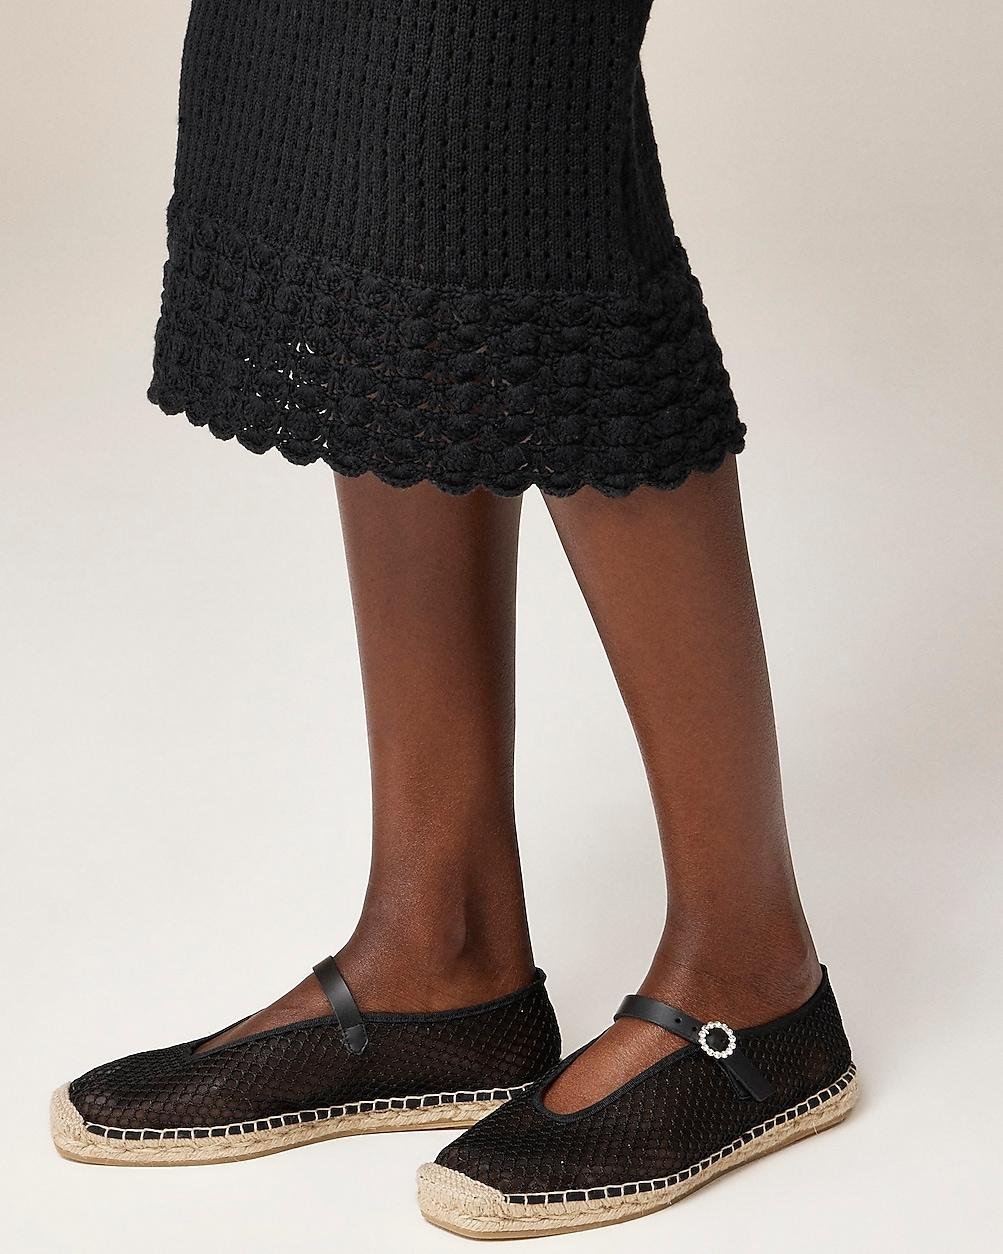 Made-in-Spain Mary Jane espadrilles in mesh by J.CREW